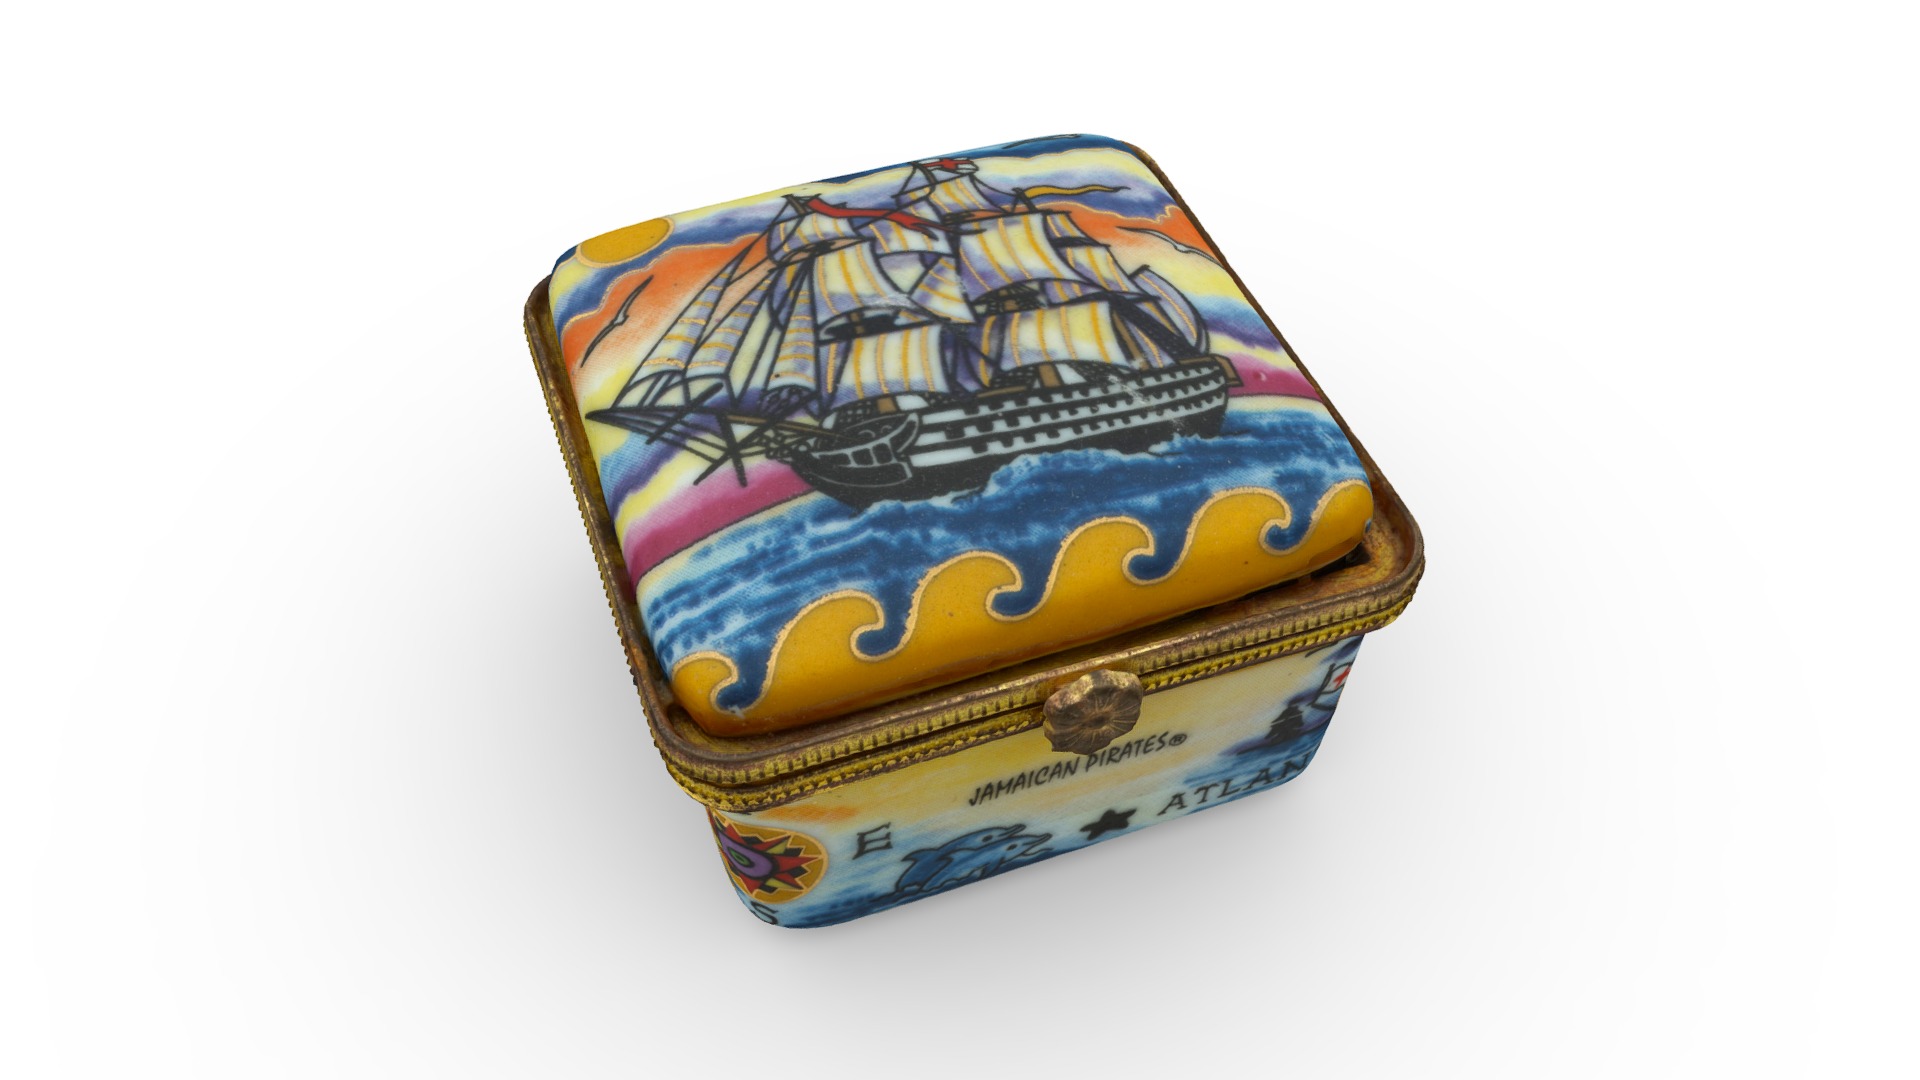 3D model Jamaica souvenir box - This is a 3D model of the Jamaica souvenir box. The 3D model is about a colorful box with a design on it.